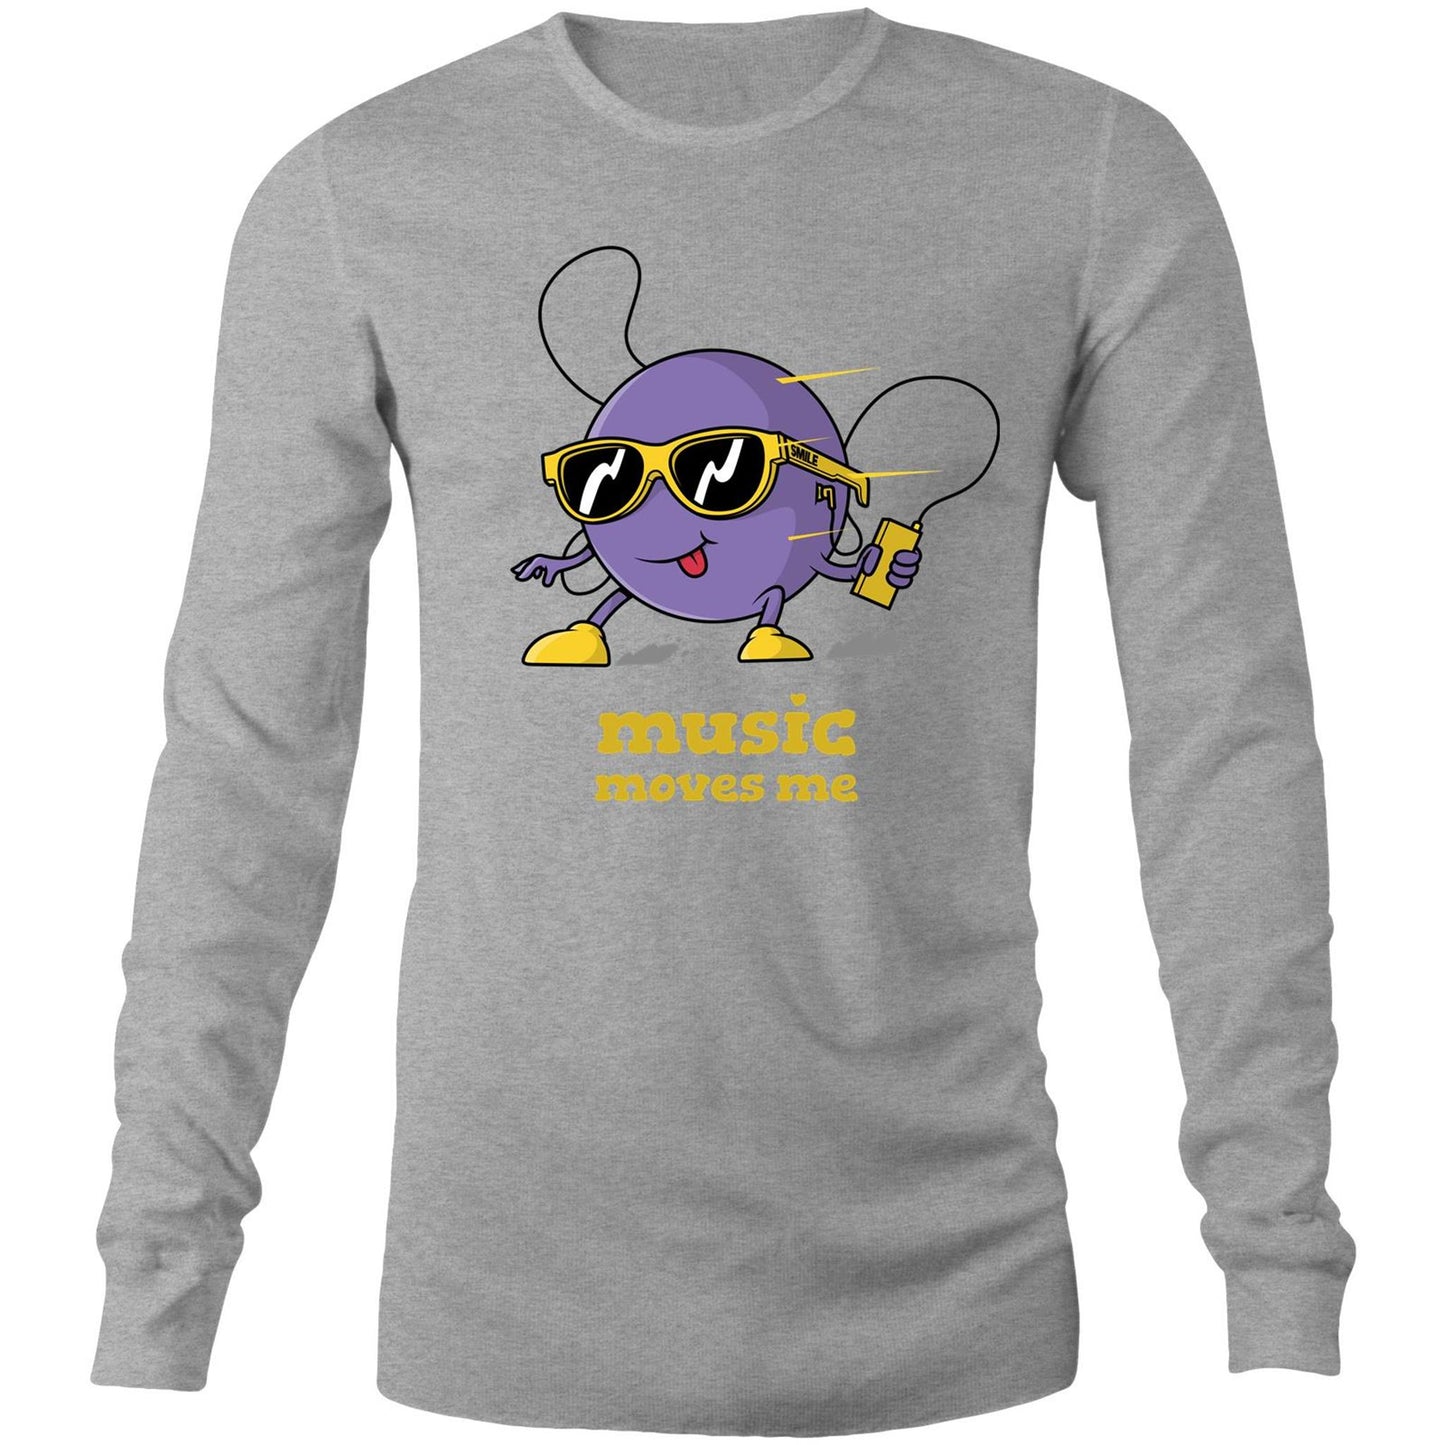 Music Moves Me, Earbuds - Long Sleeve T-Shirt Grey Marle Unisex Long Sleeve T-shirt Music